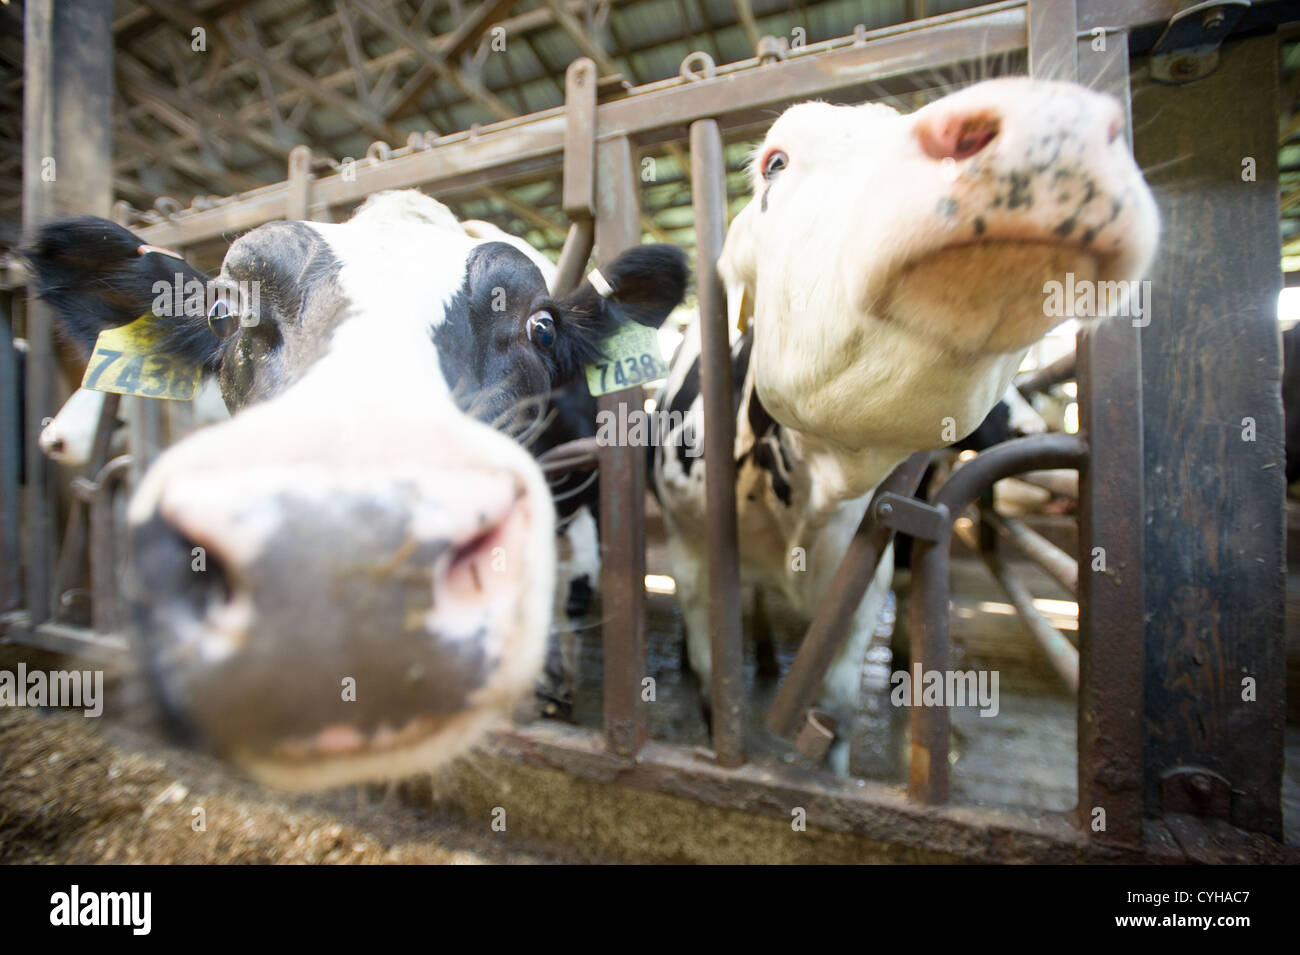 Dairy cows in a stable inside barn Stock Photo